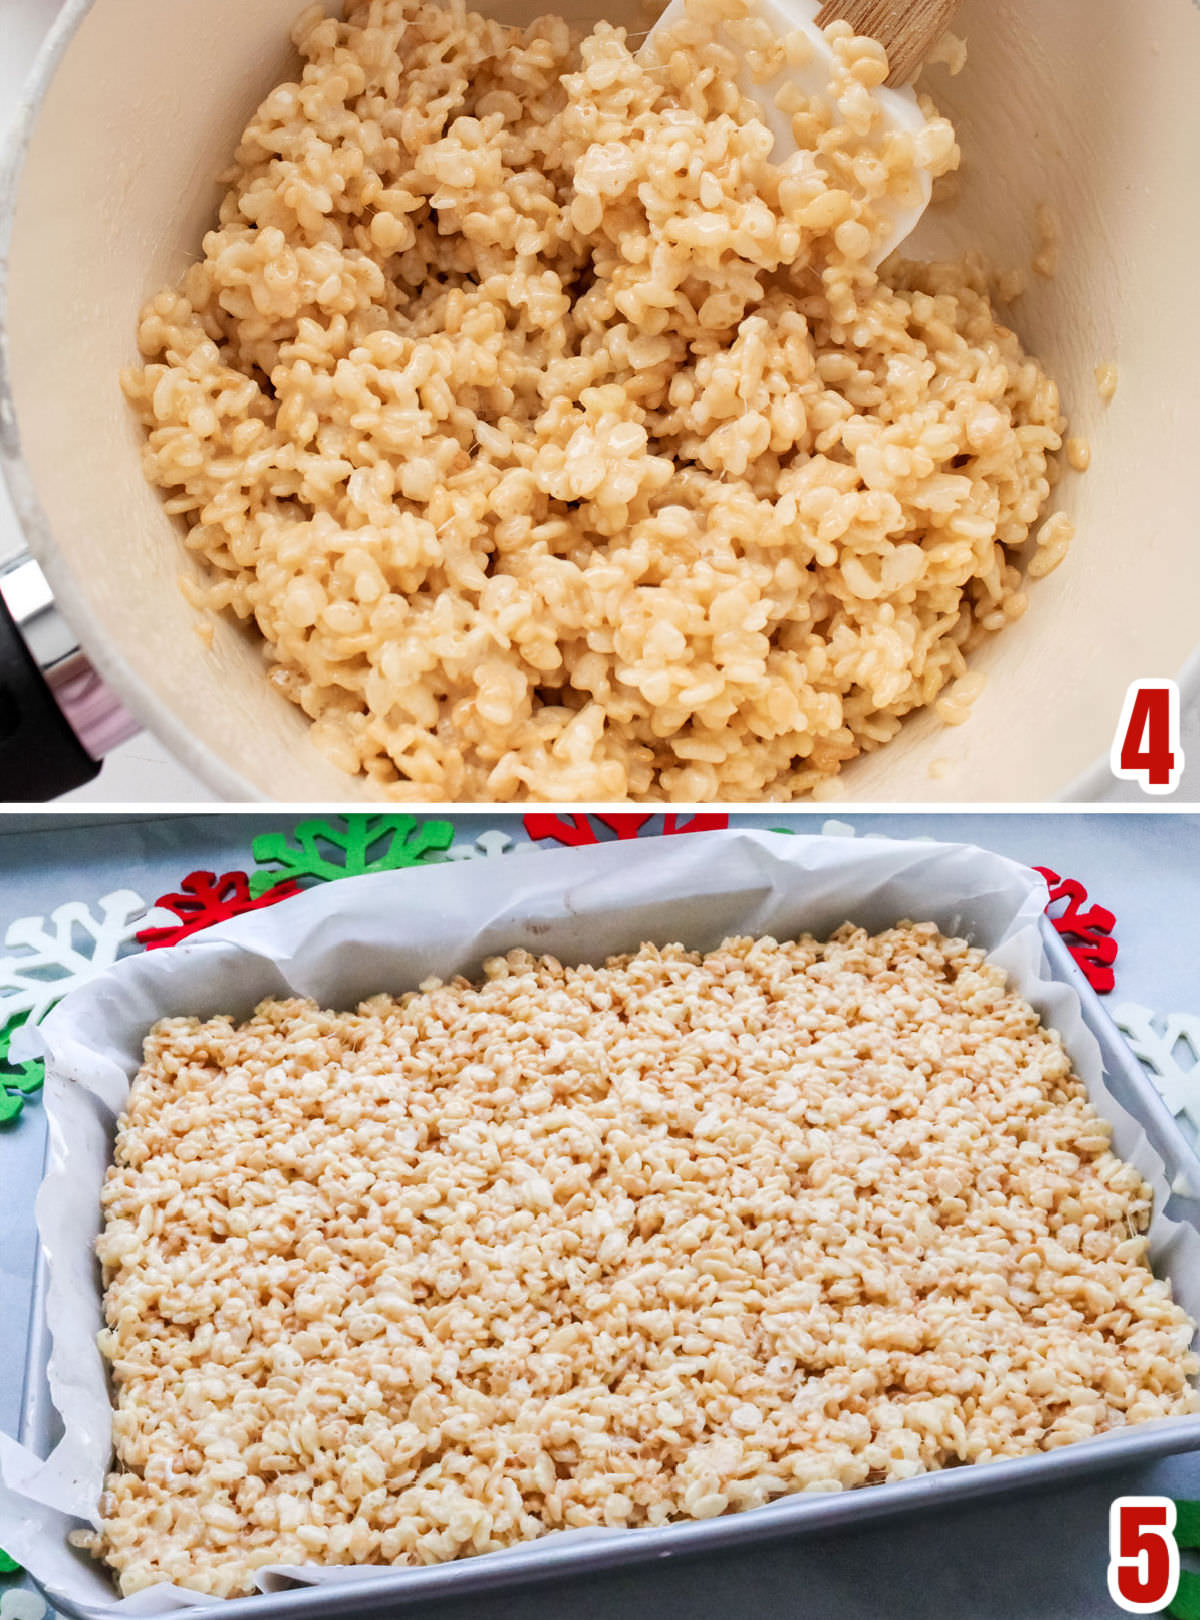 Collage image showing the steps for making the Rice Krispie Treat layer.